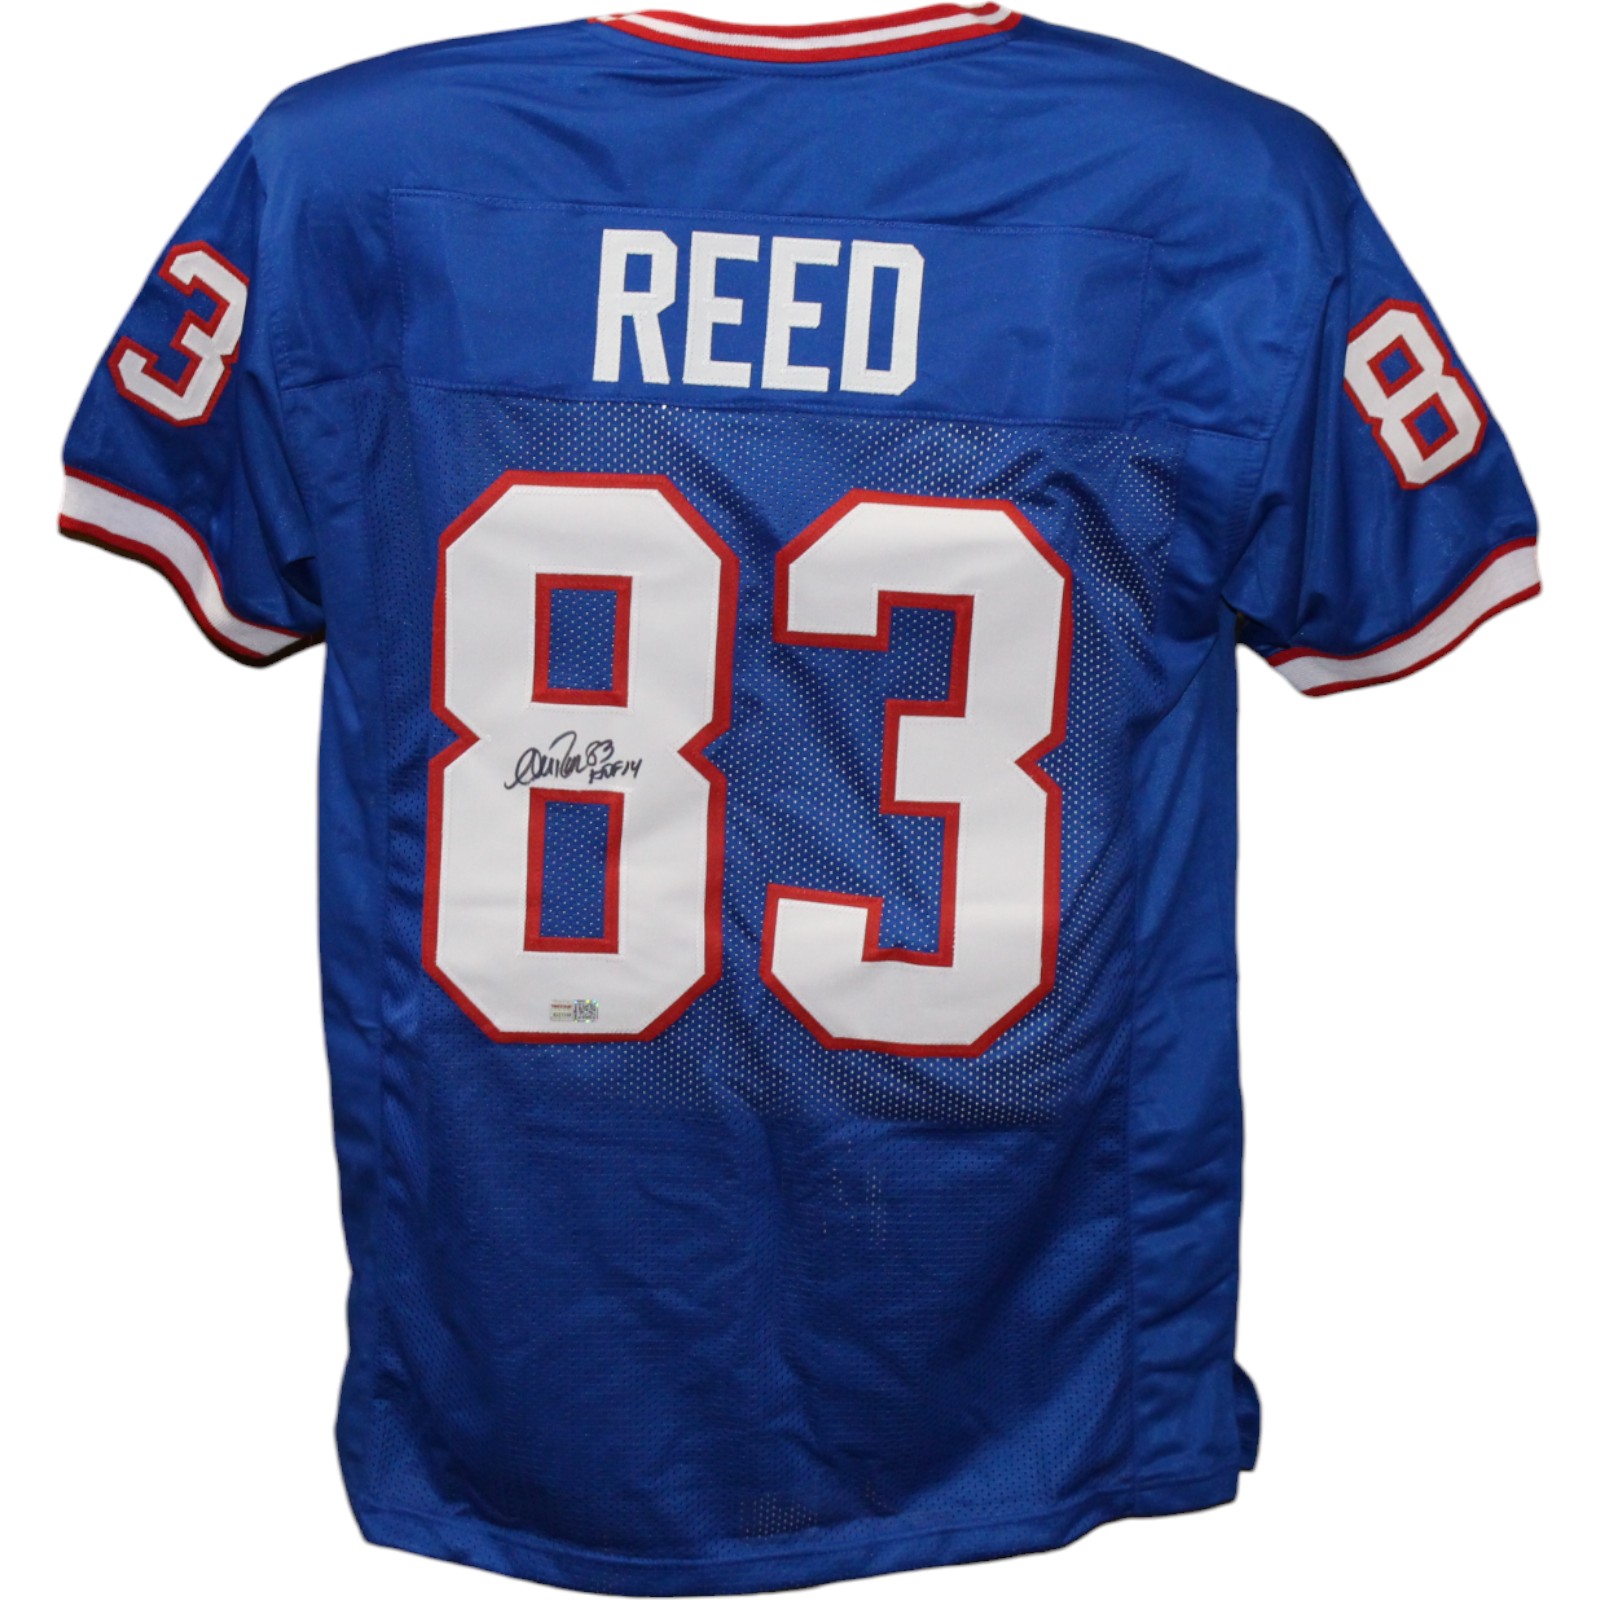 Andre Reed Autographed/Signed Pro Style Blue Jersey HOF TRI